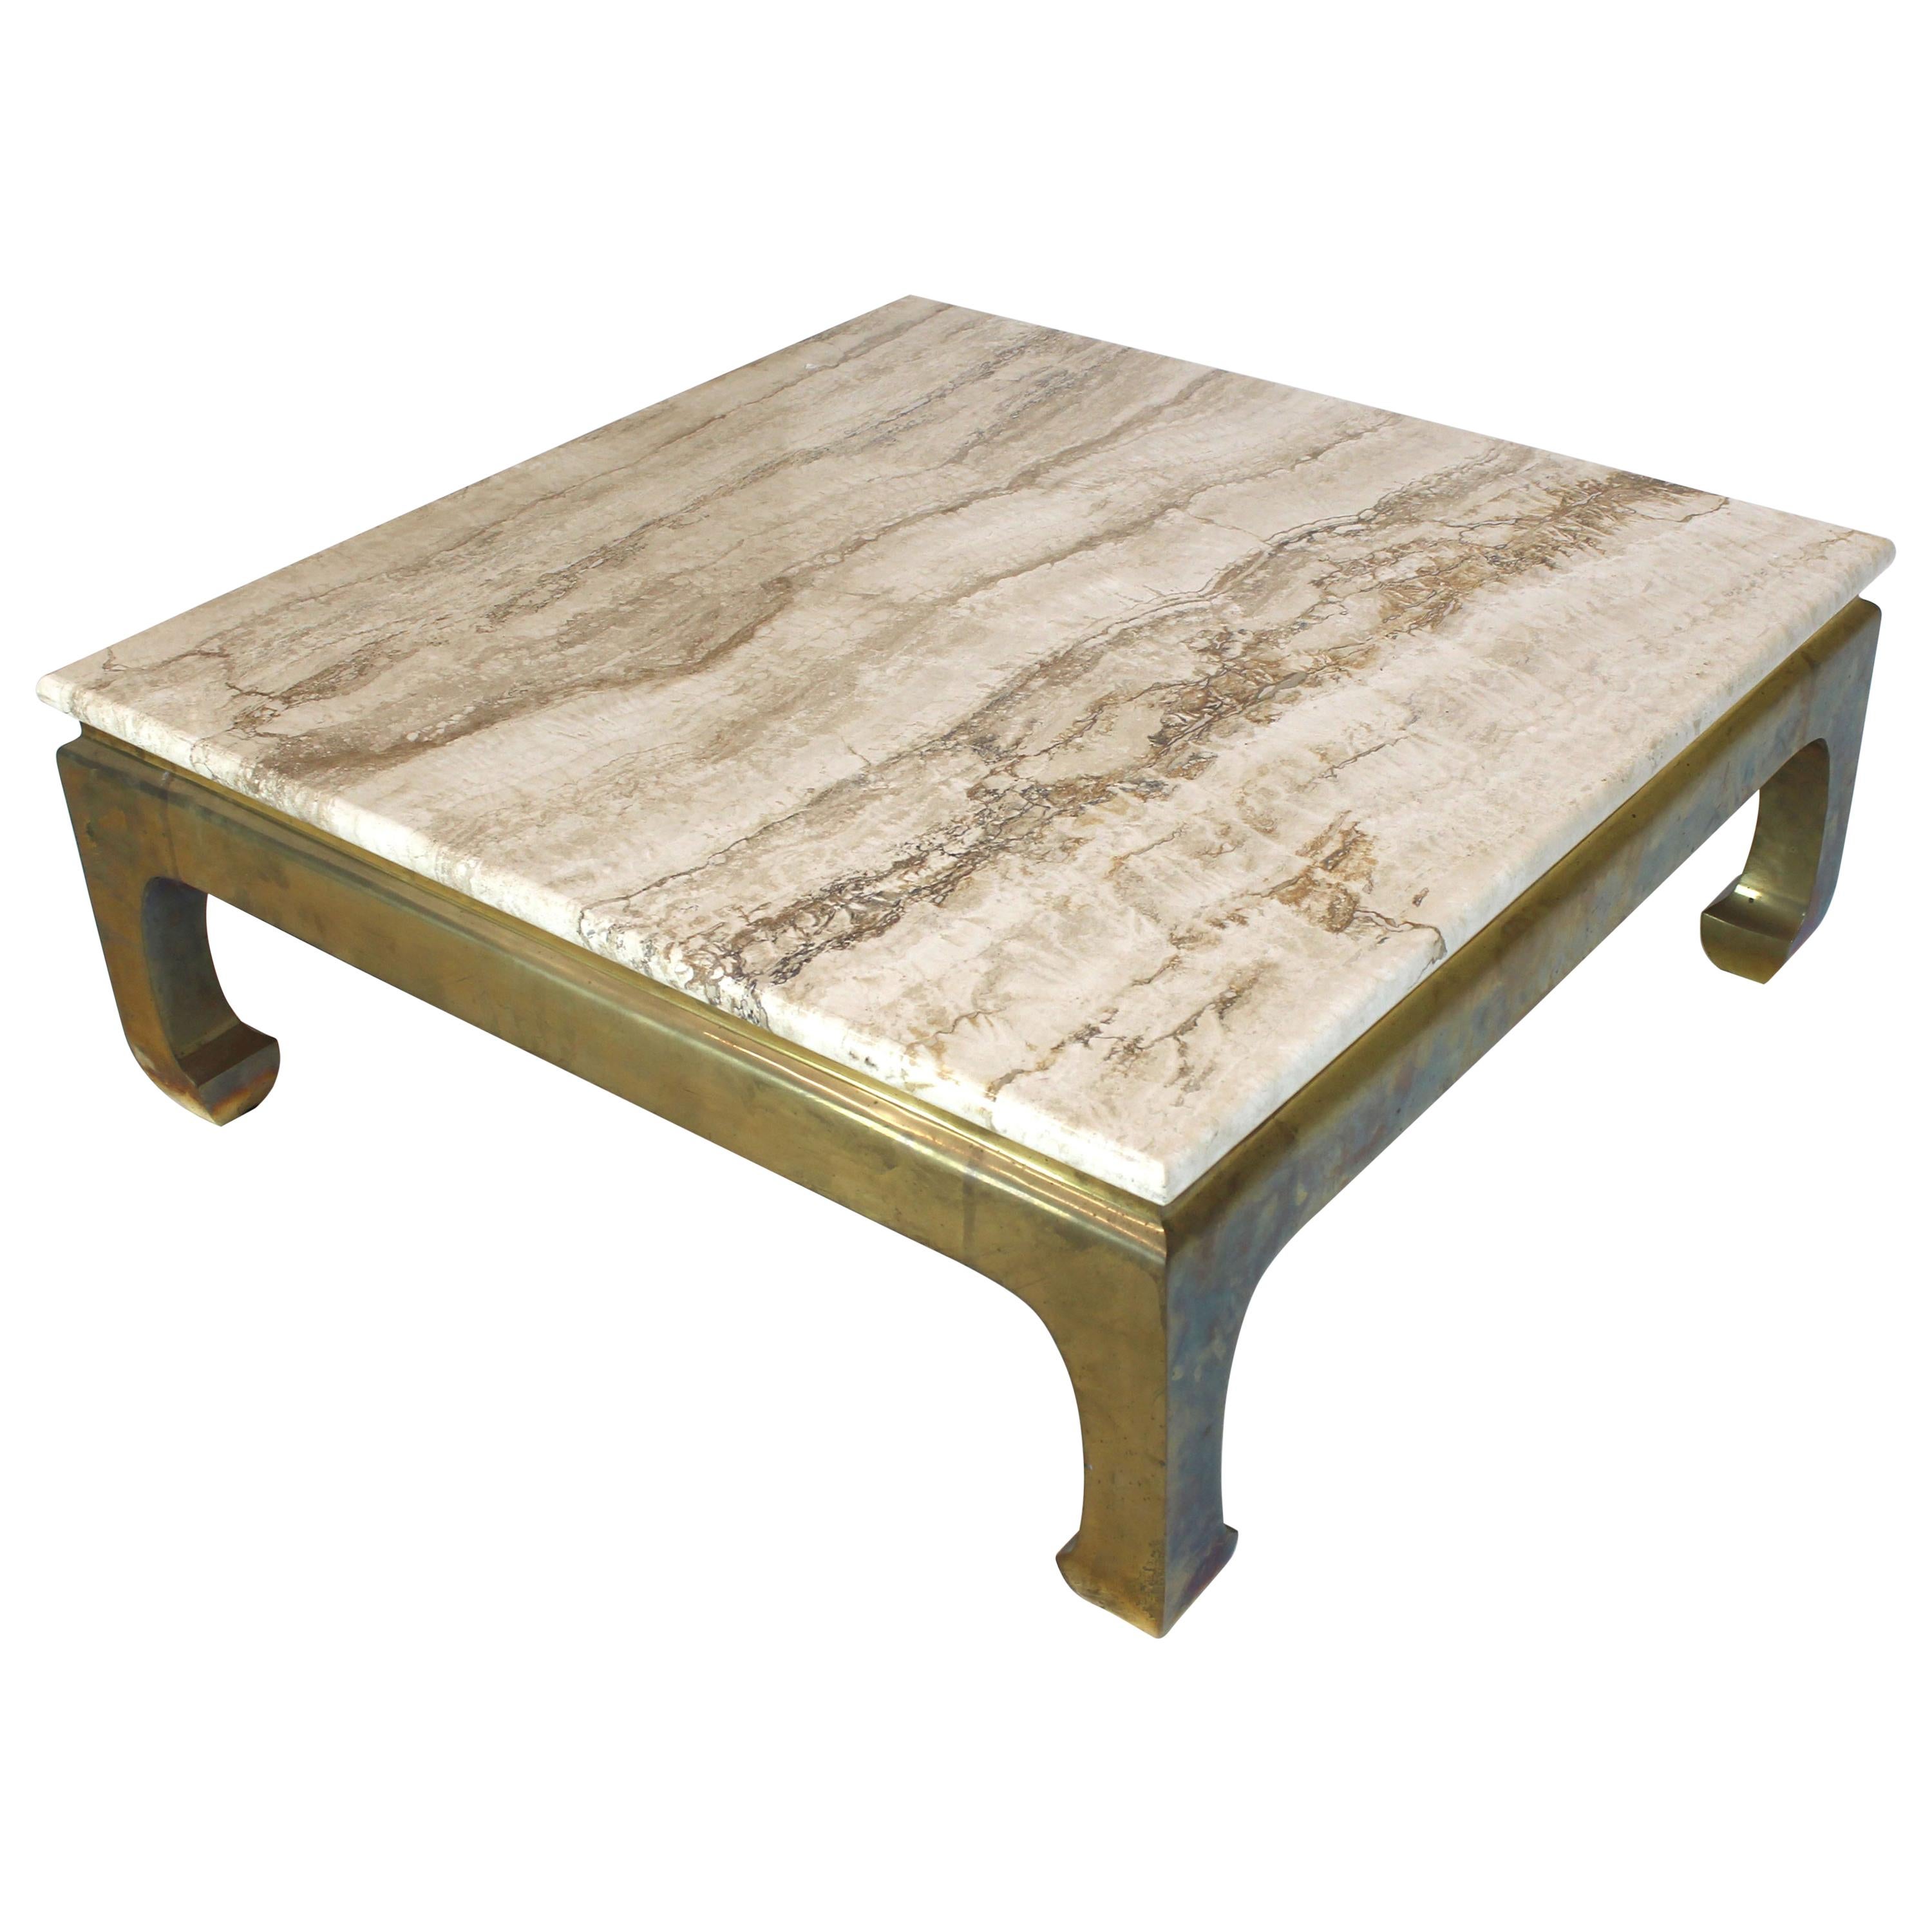 Solid Brass Base Square Travertine Top Coffee Center Table